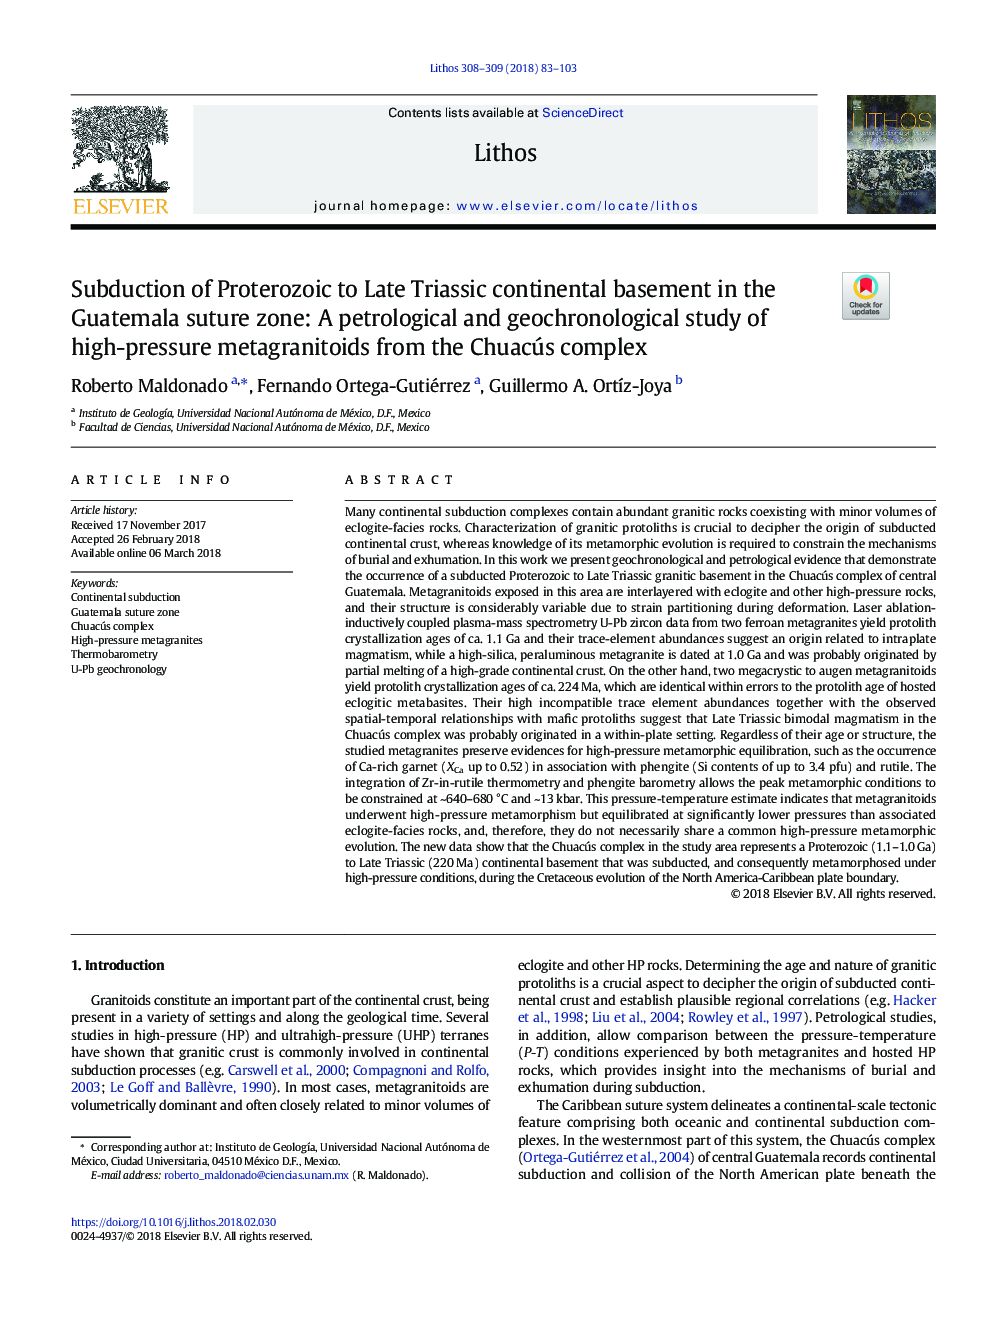 Subduction of Proterozoic to Late Triassic continental basement in the Guatemala suture zone: A petrological and geochronological study of high-pressure metagranitoids from the Chuacús complex